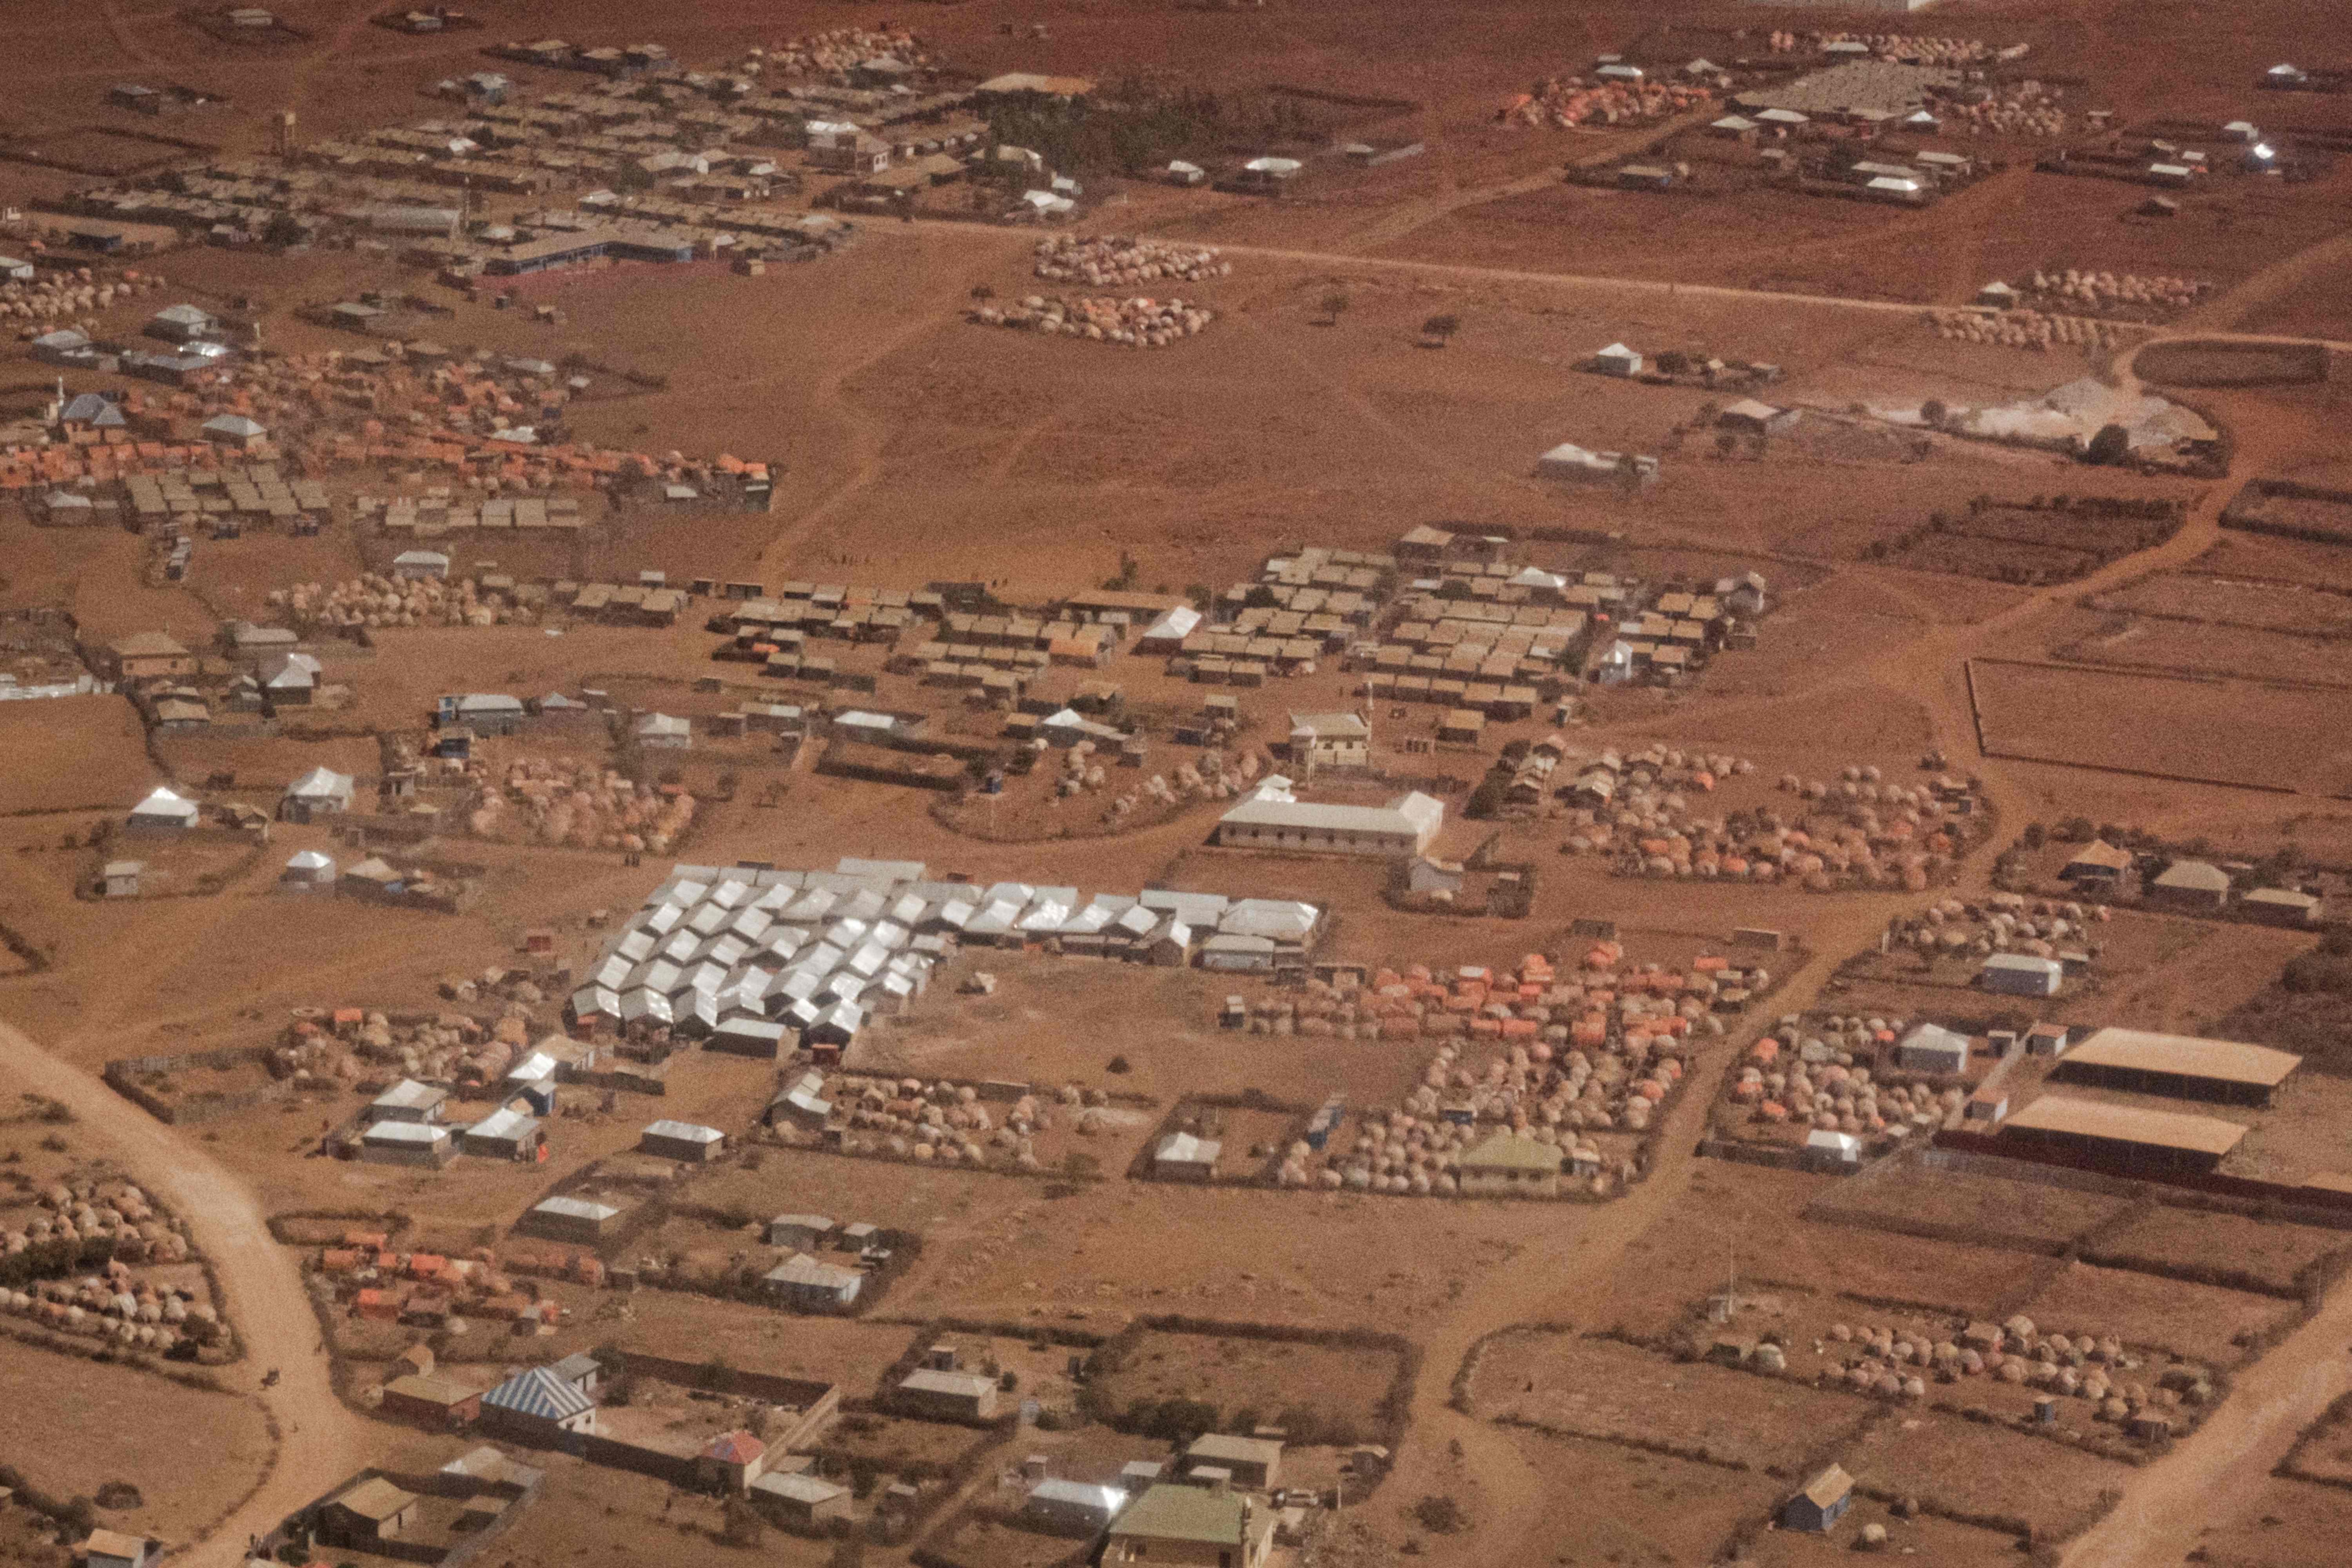 An aerial view of camps for internally displaced persons (IDPs) in Baidoa, Somalia, on 15 February, 2022